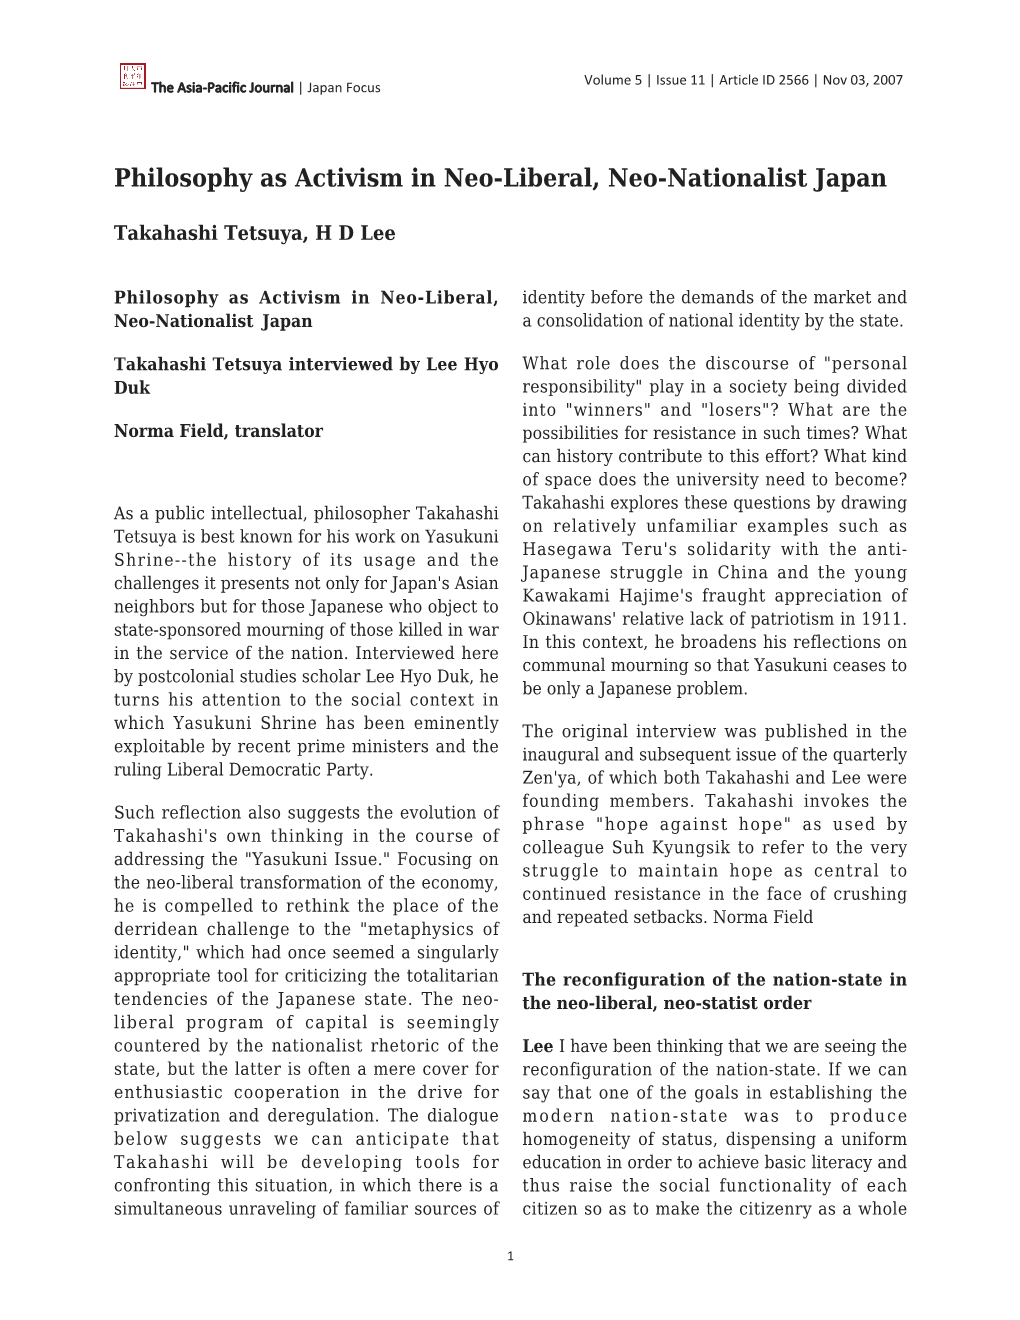 Philosophy As Activism in Neo-Liberal, Neo-Nationalist Japan